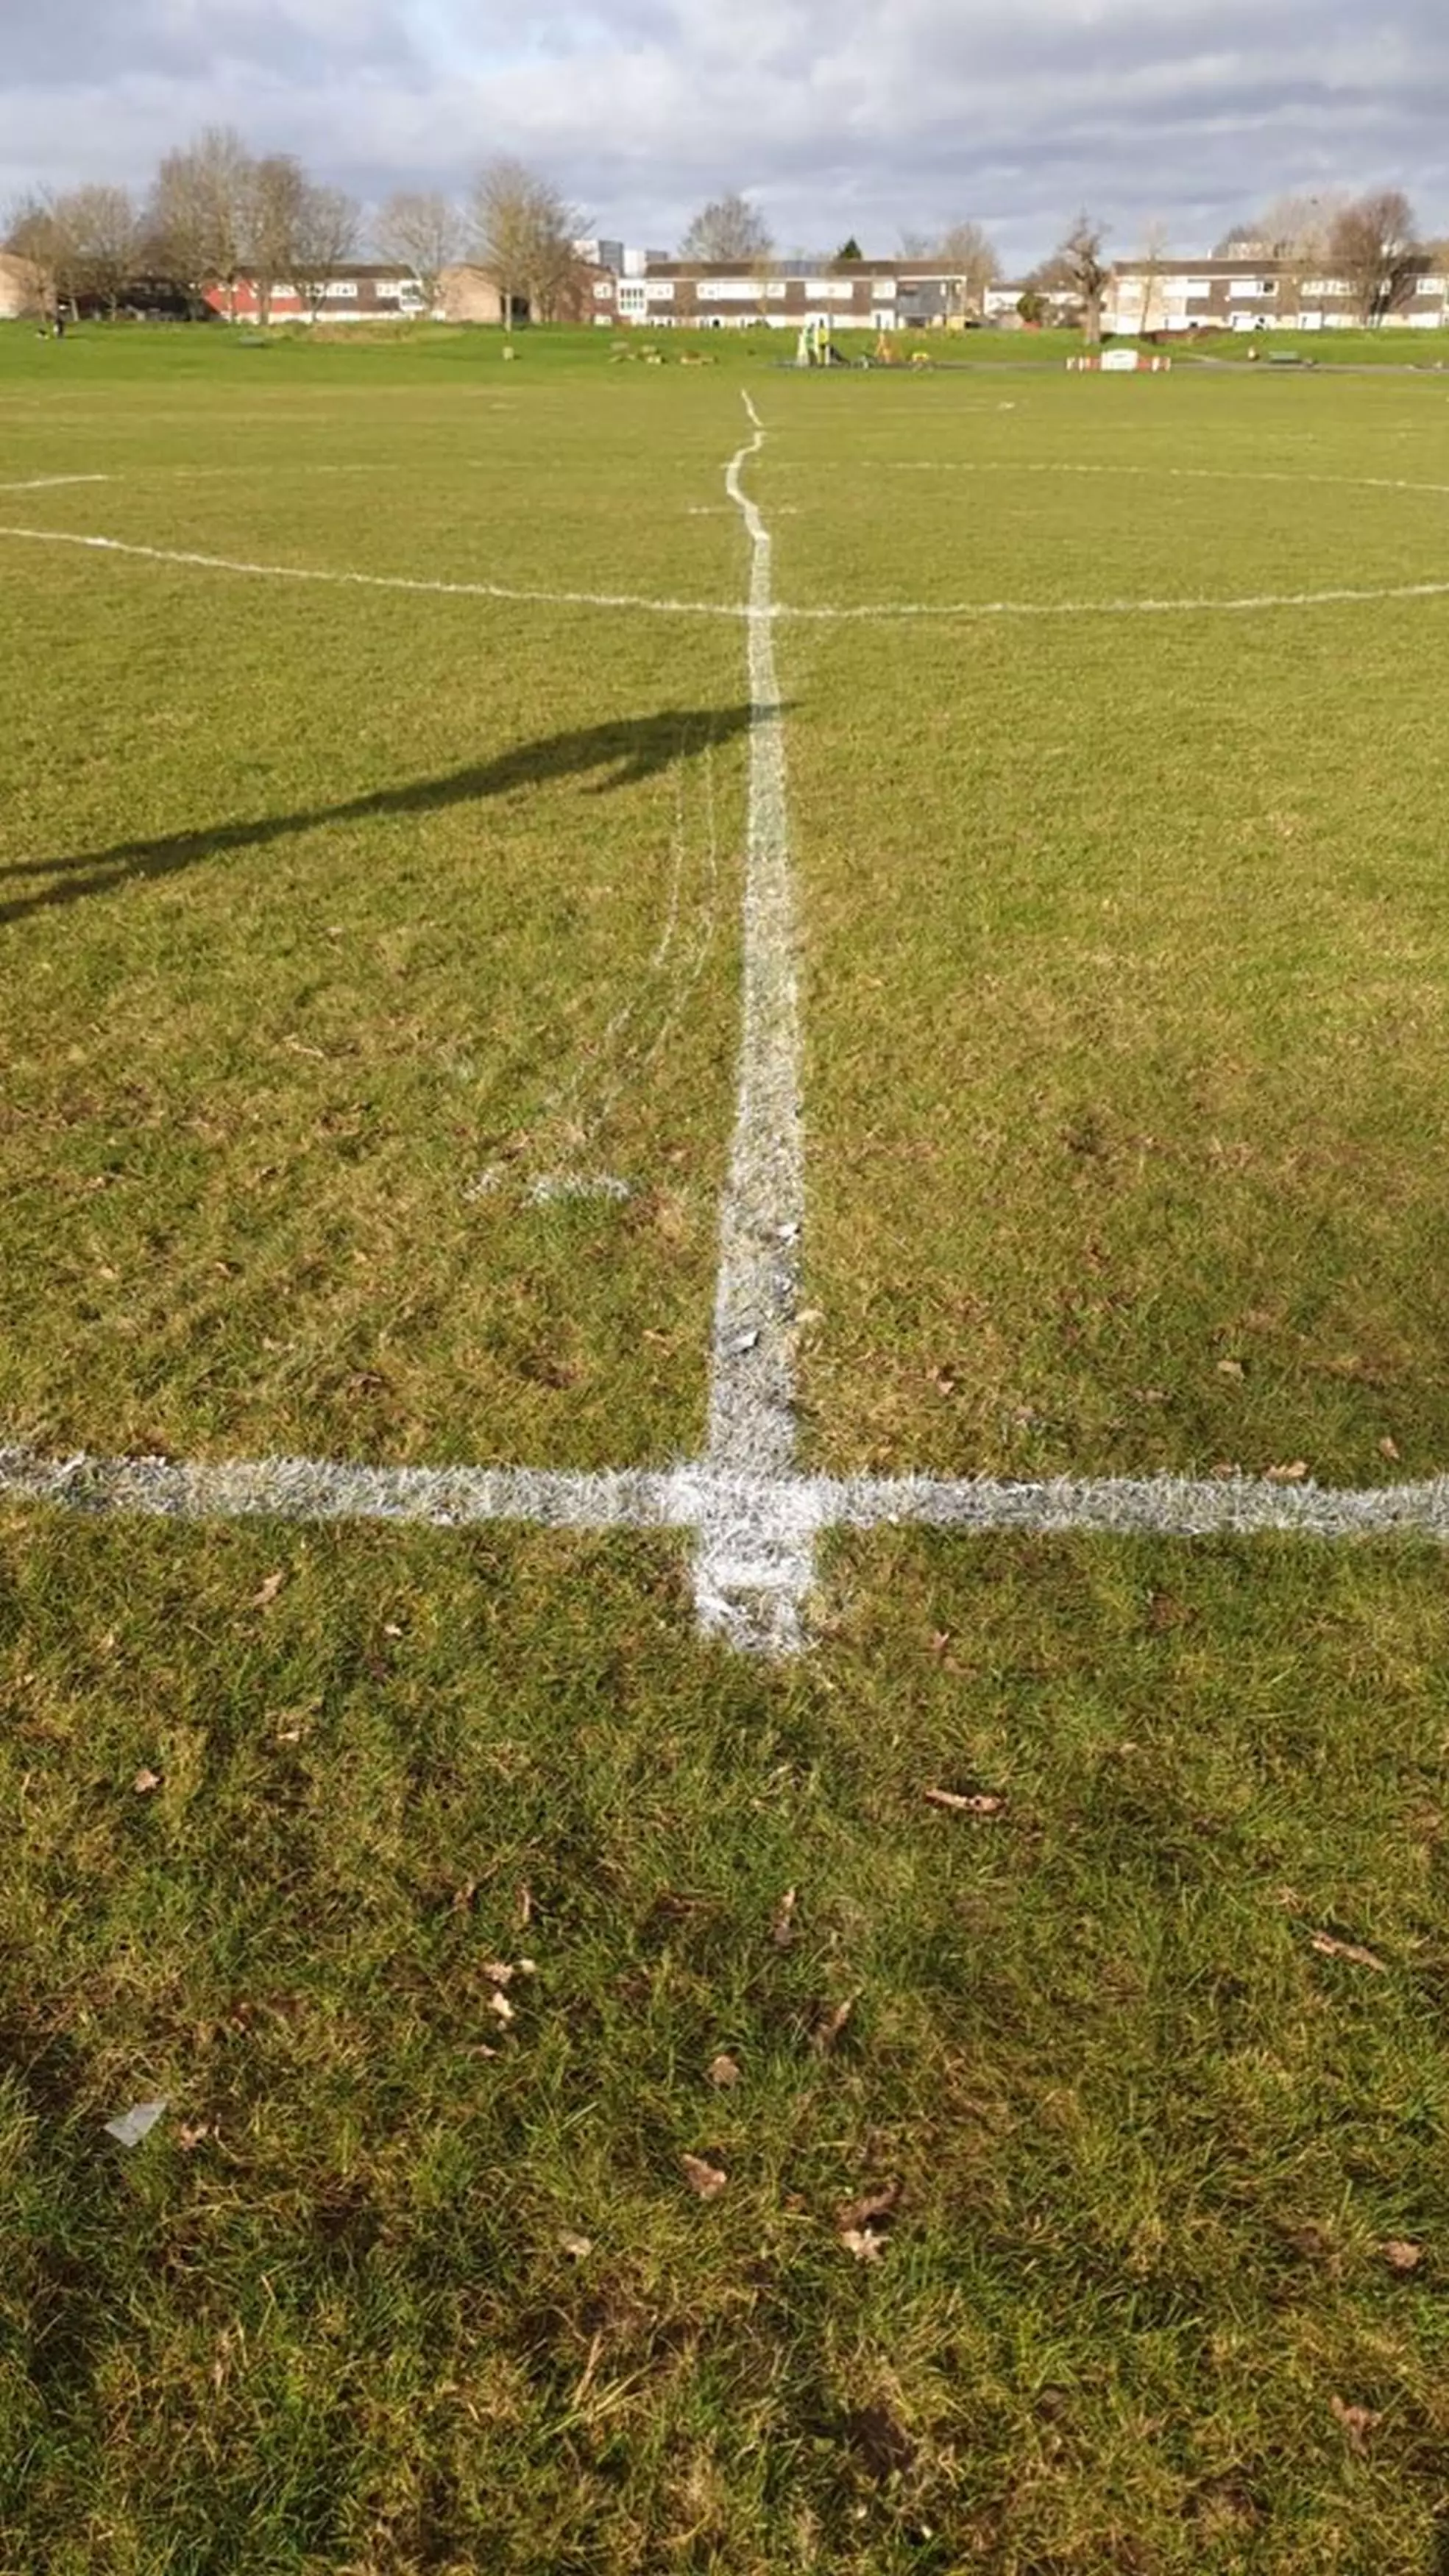 The half-way line wasn't looking too shabby, either.